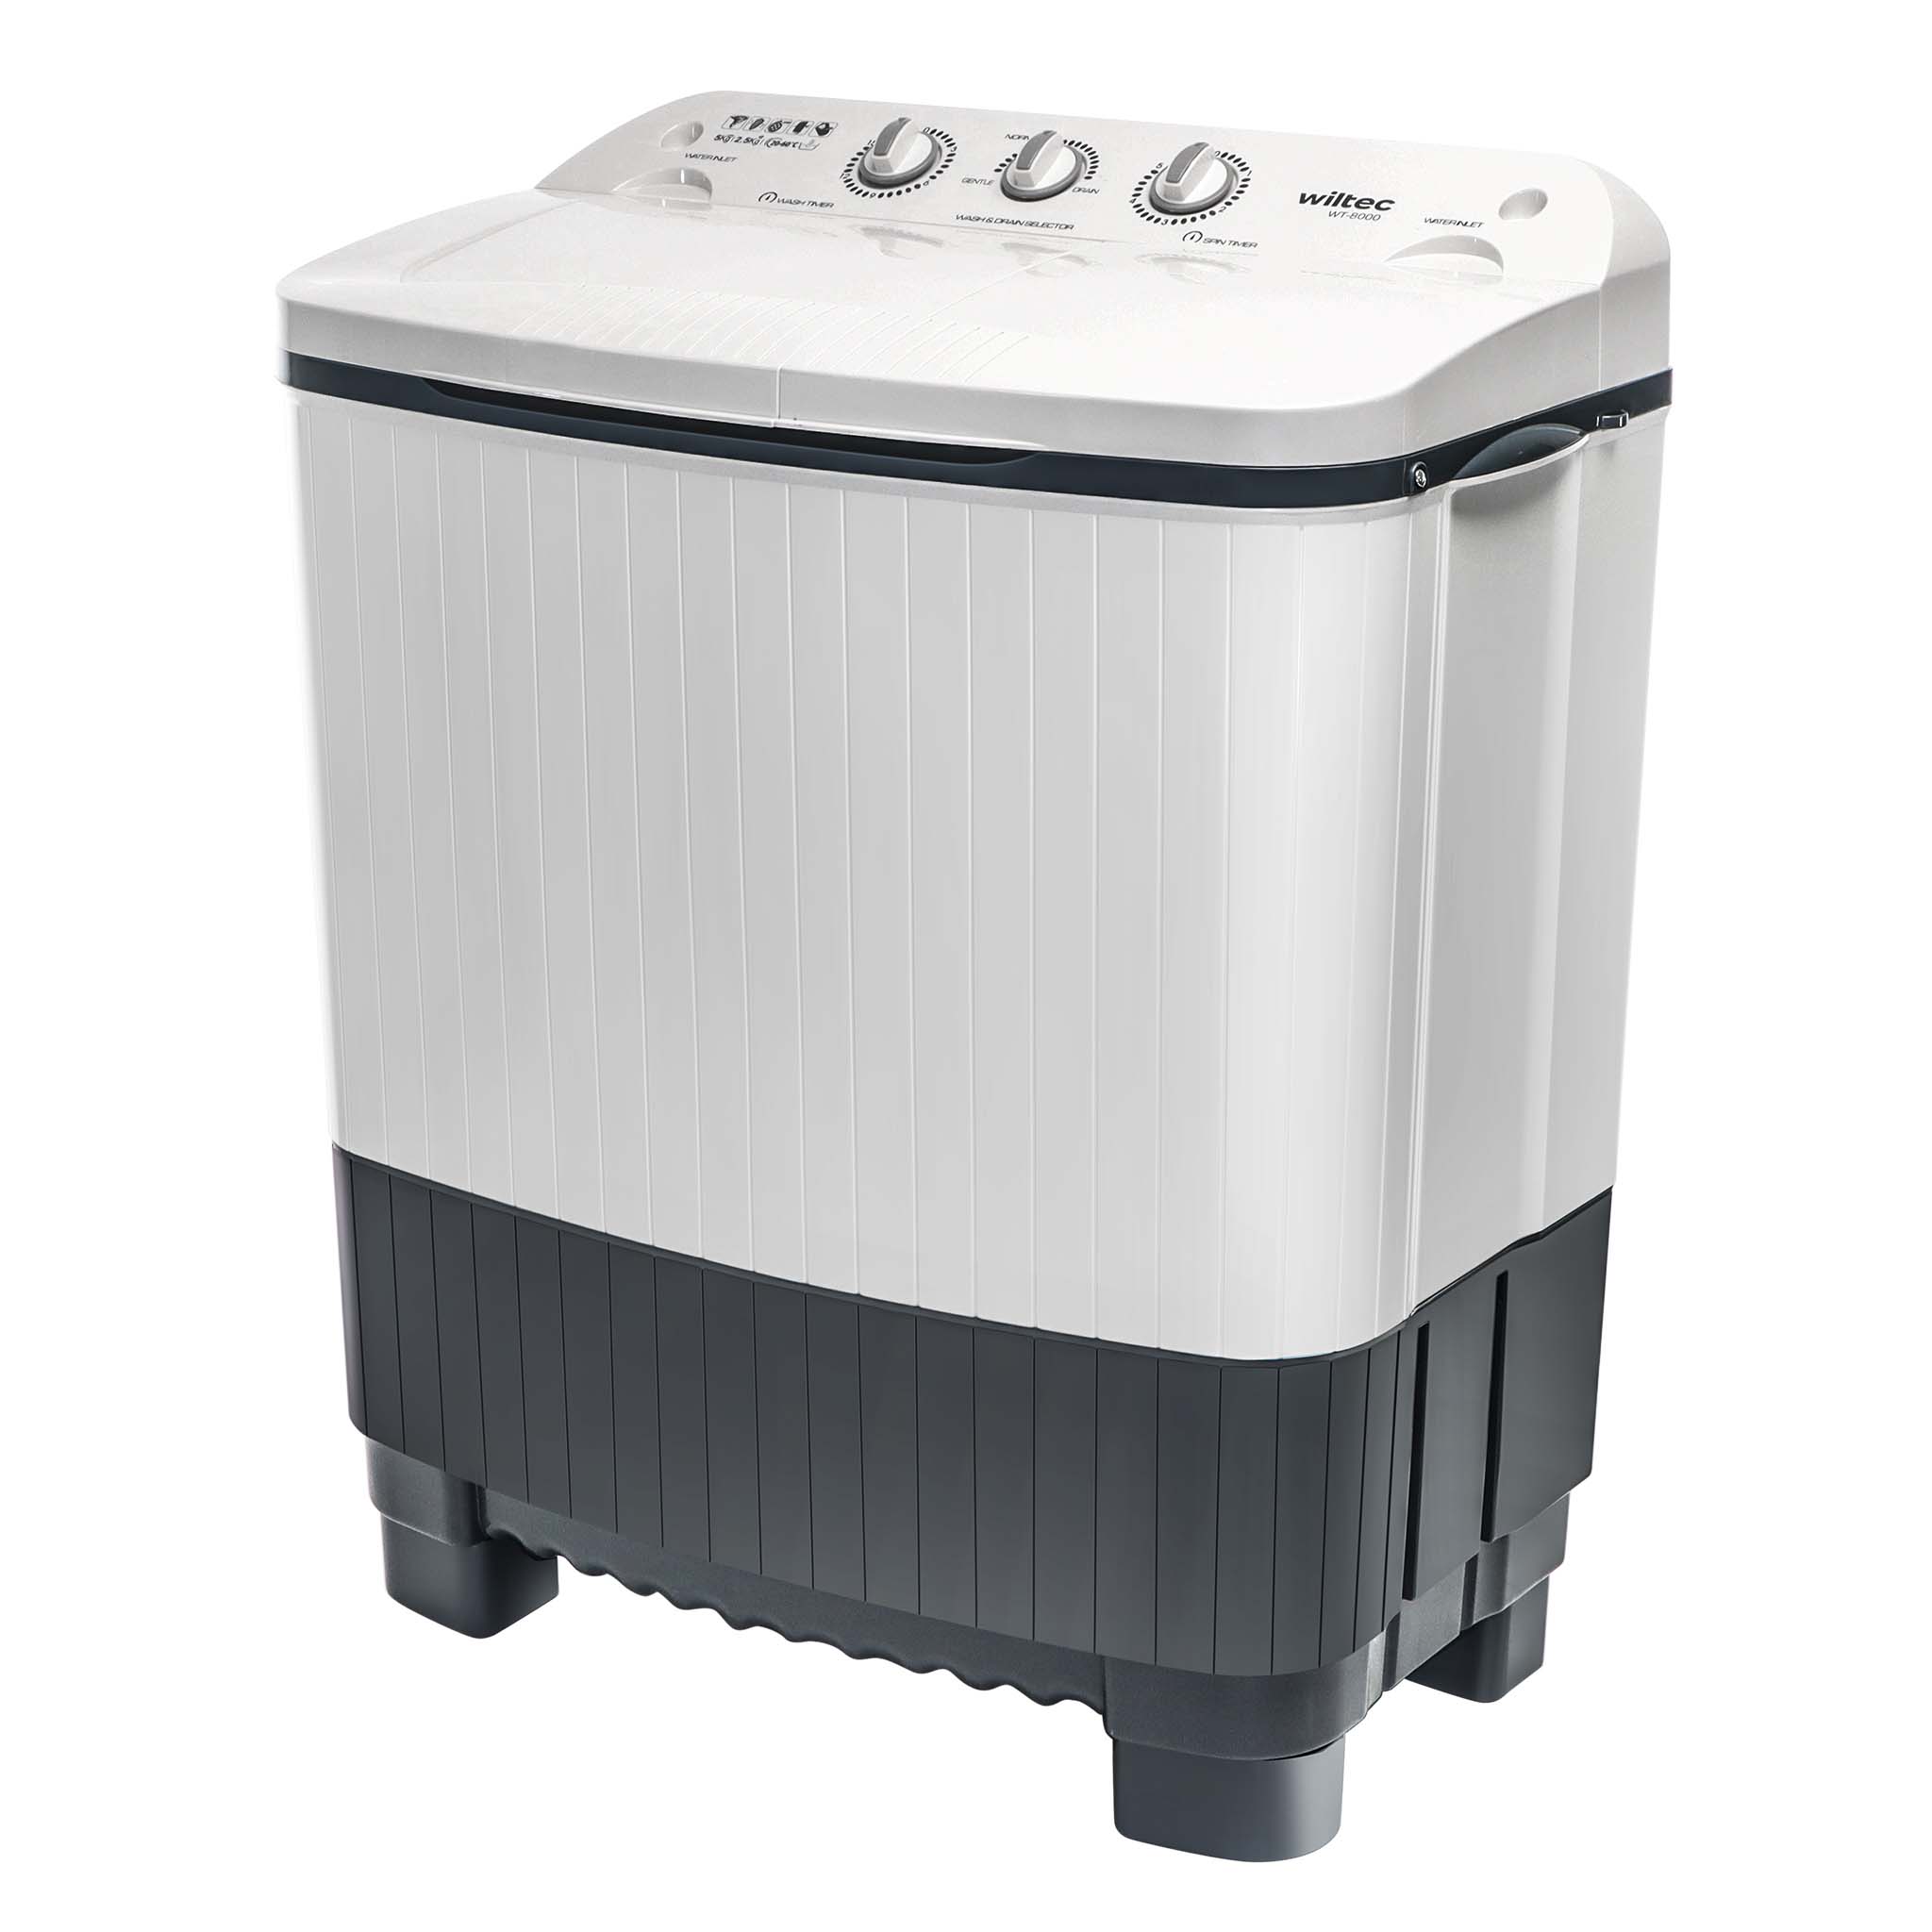 Wiltec WT-8000 2-chamber Camping Washing Machine 350W Clothes Waser  w/Spin-dryer 5kg Laundry w/Timer